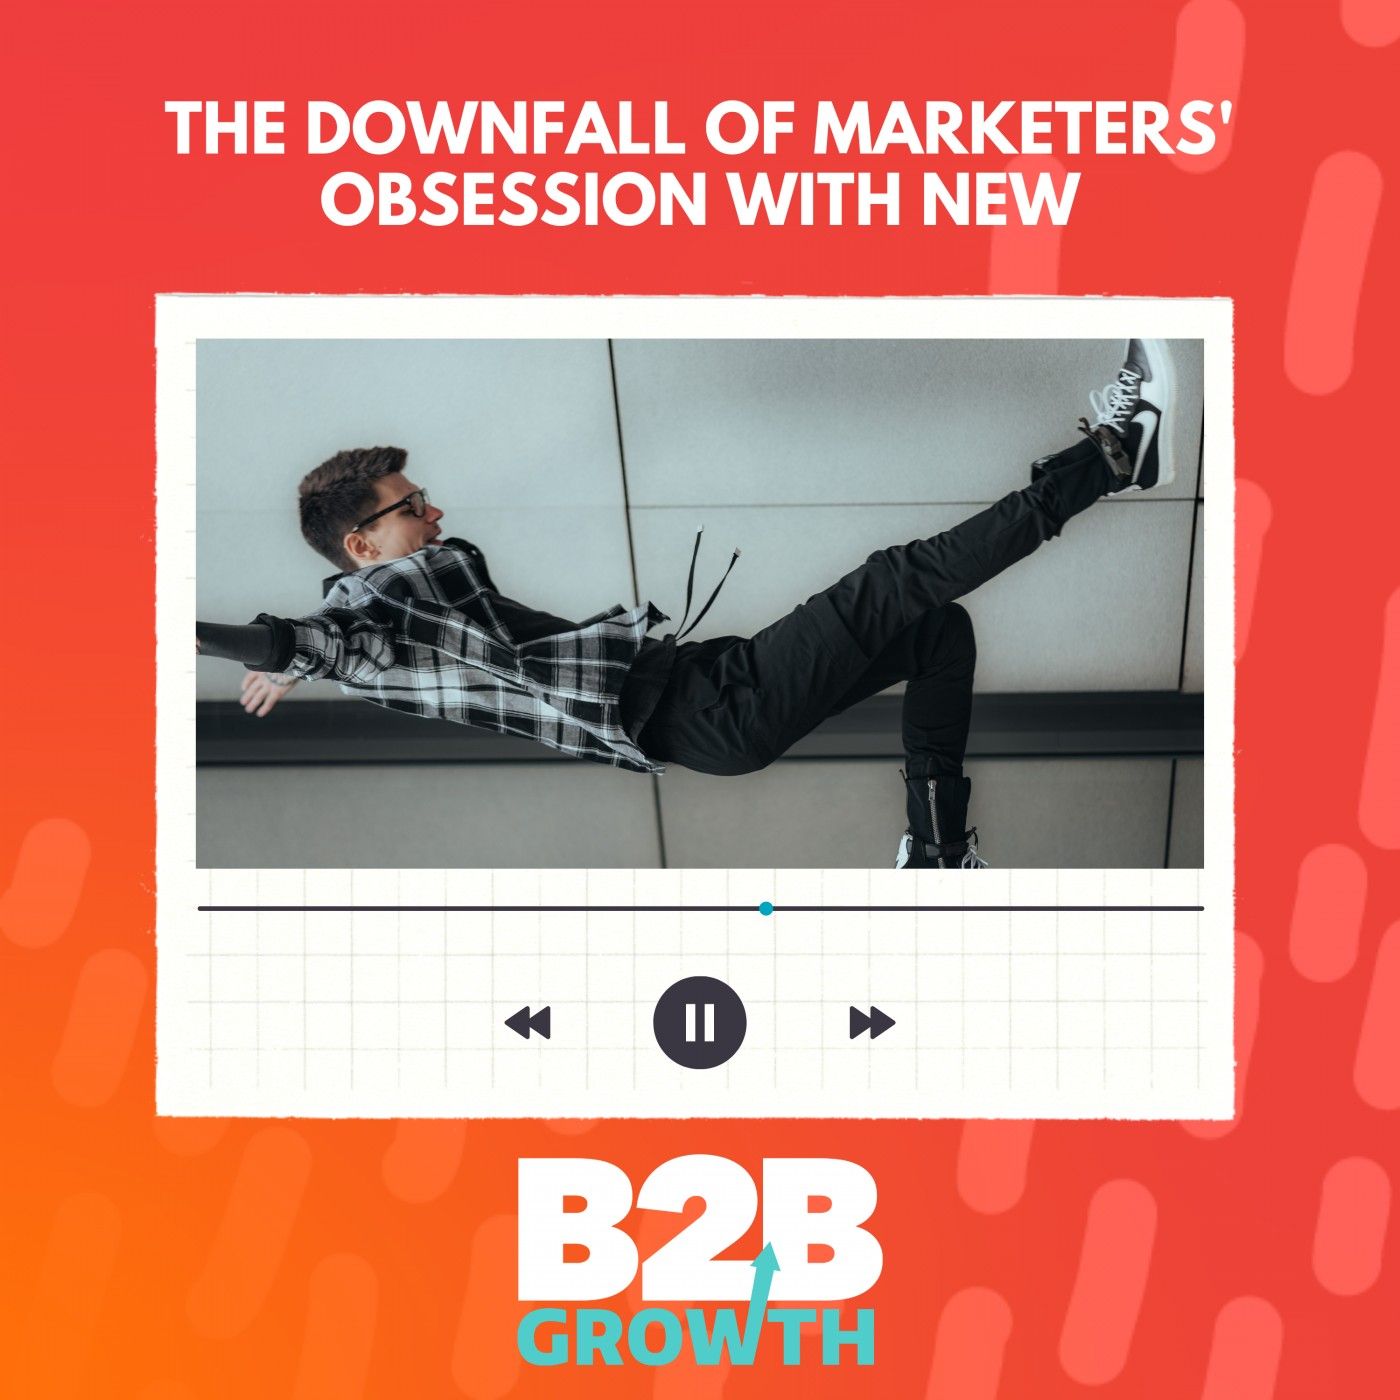 The Downfall of Marketers’ Obsession with New